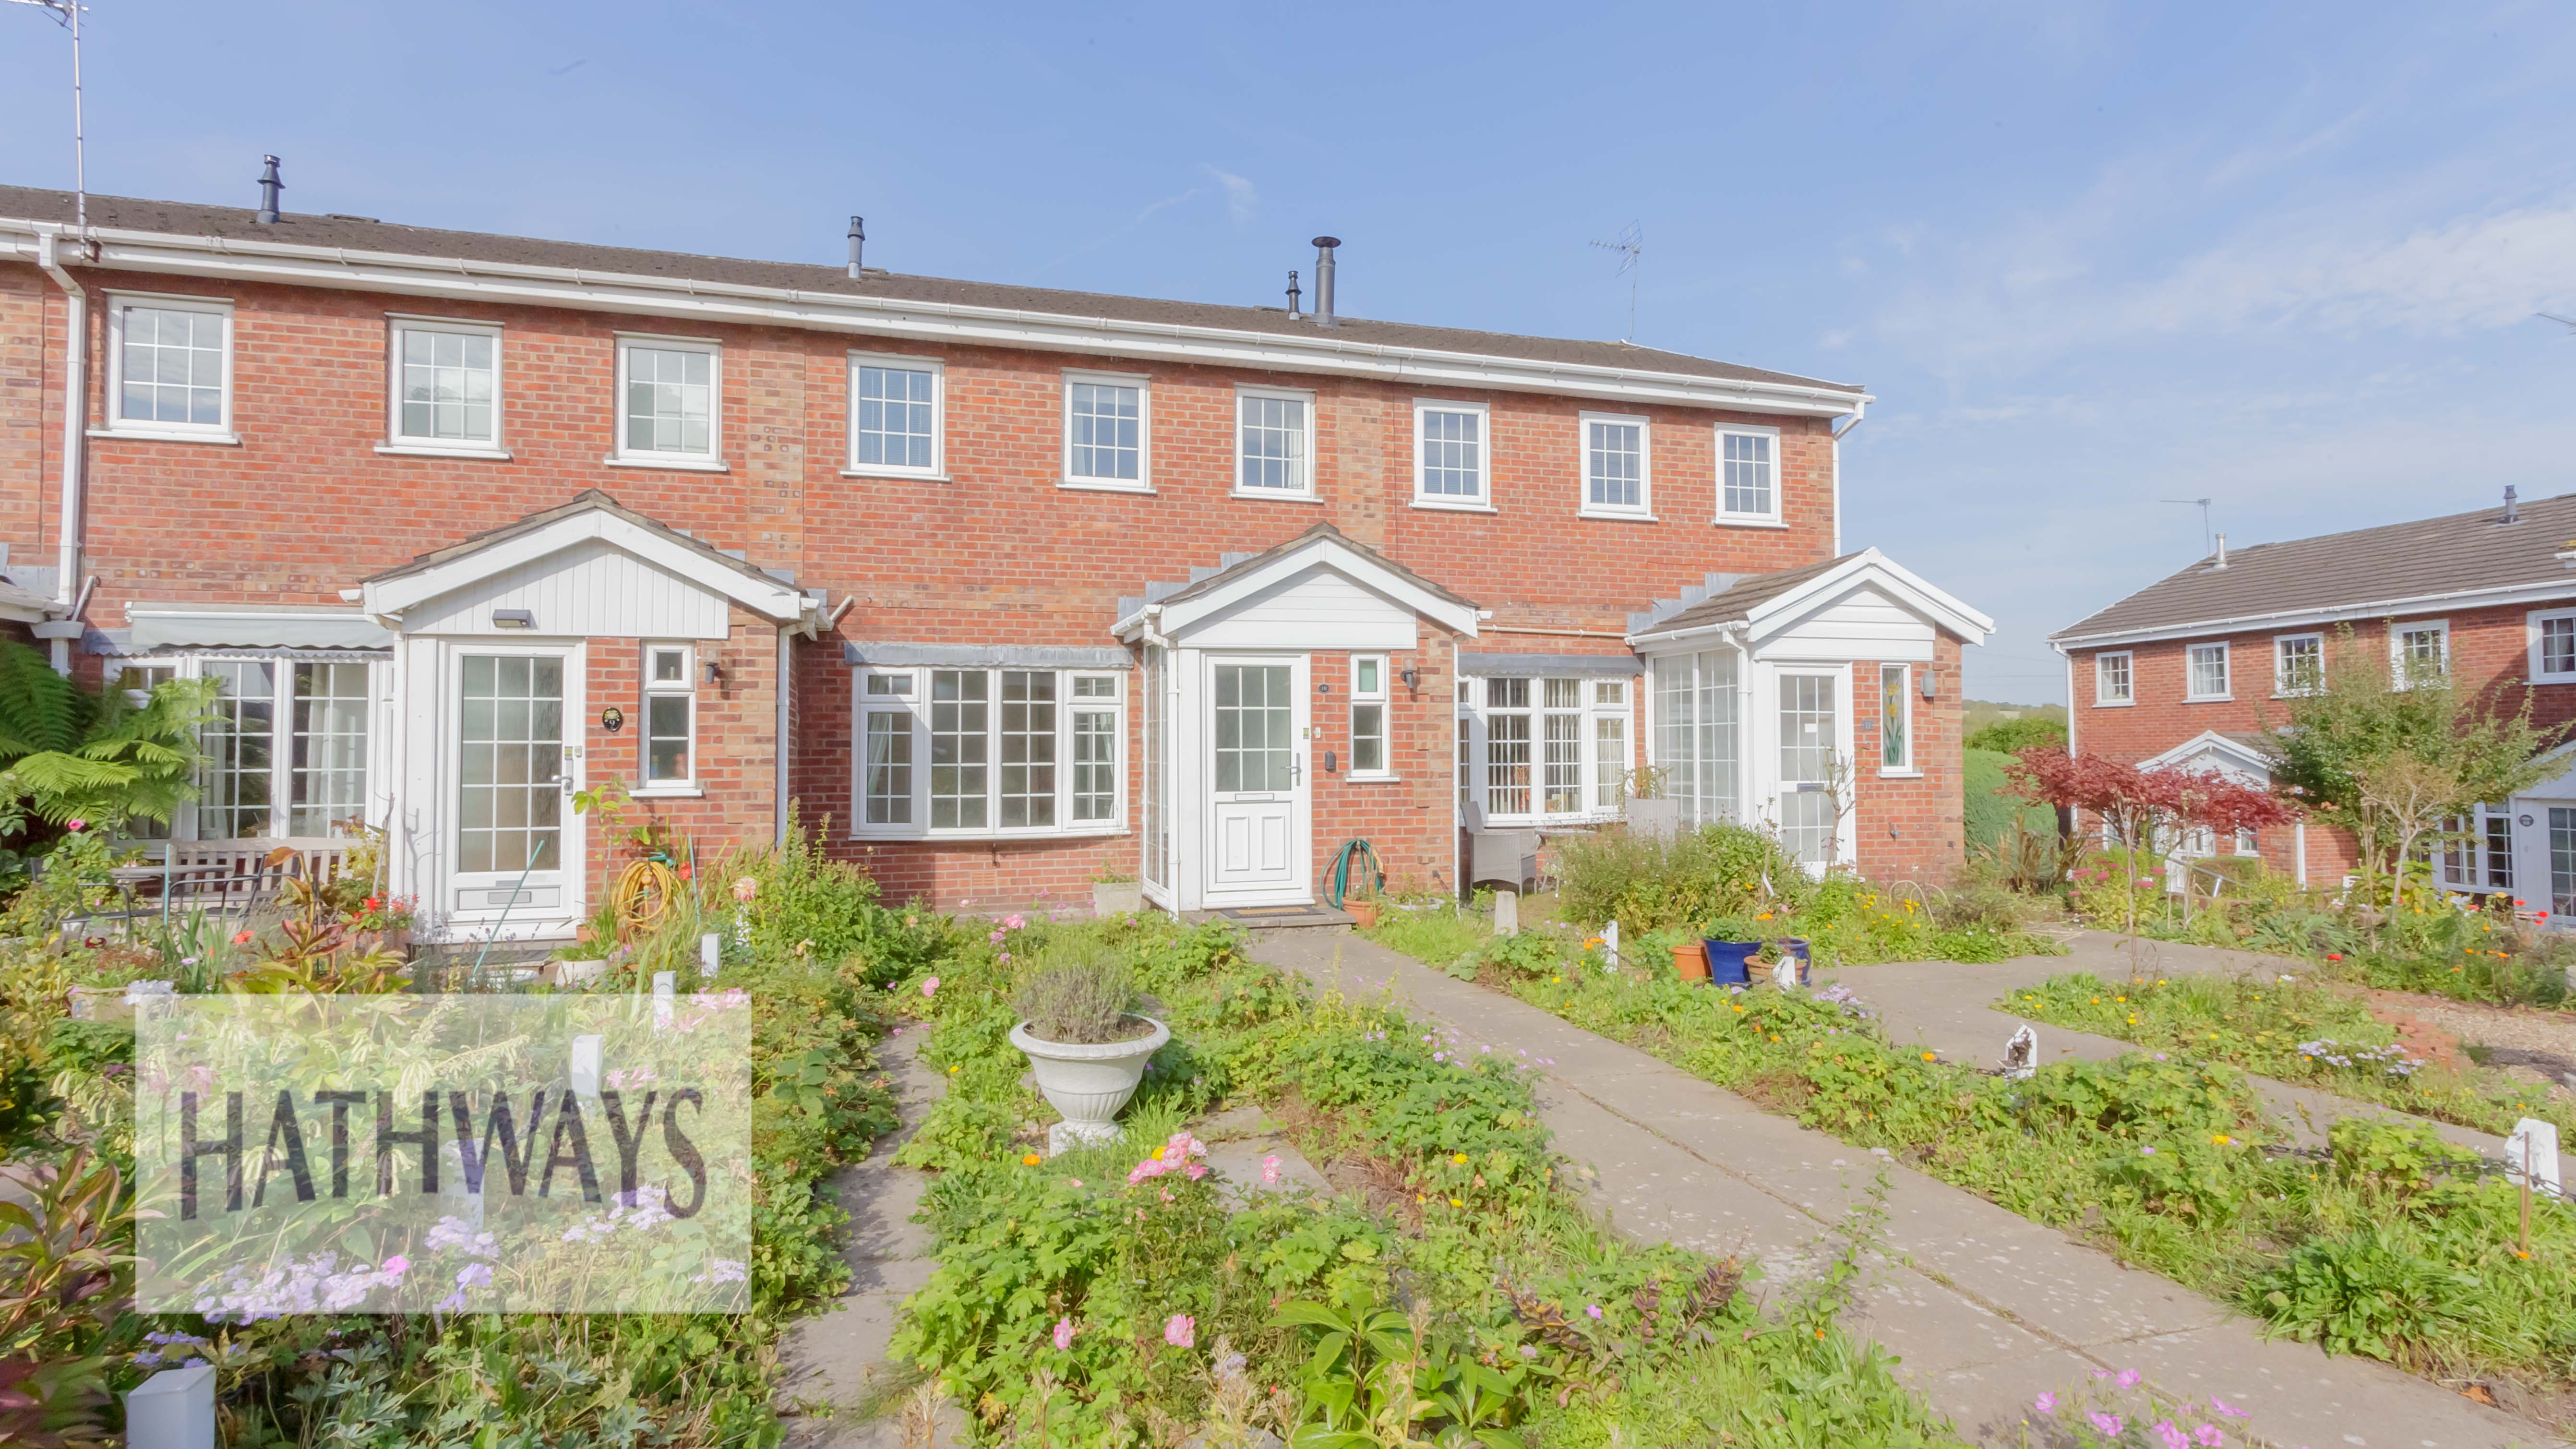 3 bed house for sale in Broadwell Court, Newport - Property Image 1